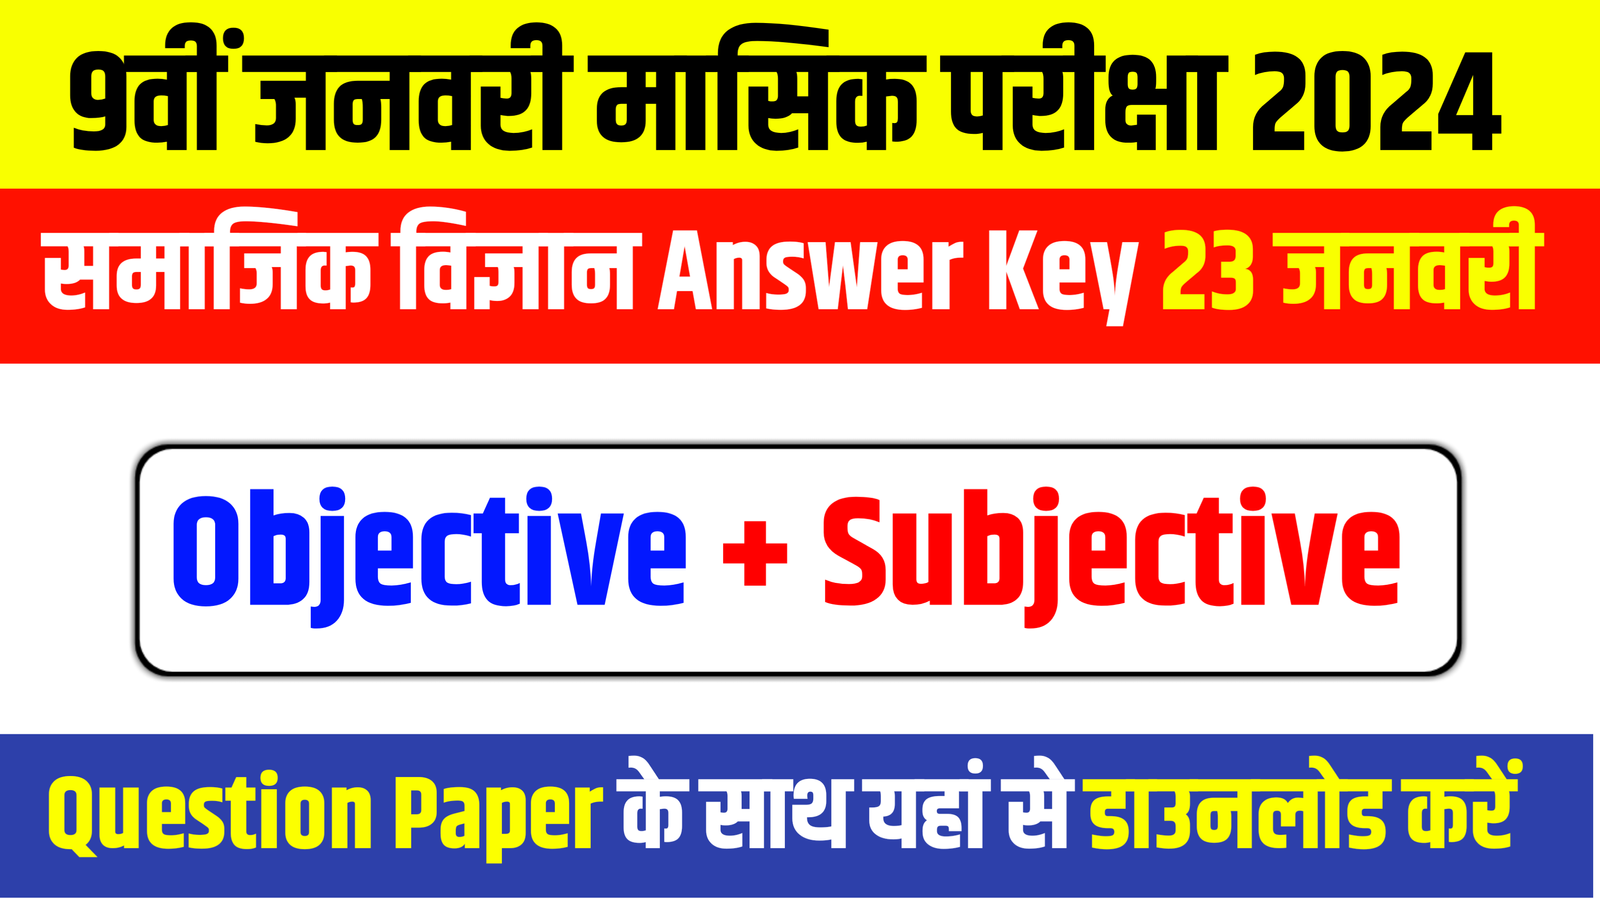 Bihar Board 9th Social Science Answer Key: 9th Social Science Objective Subjective Question Paper Download Pdf 9th Monthly Exam January 2024